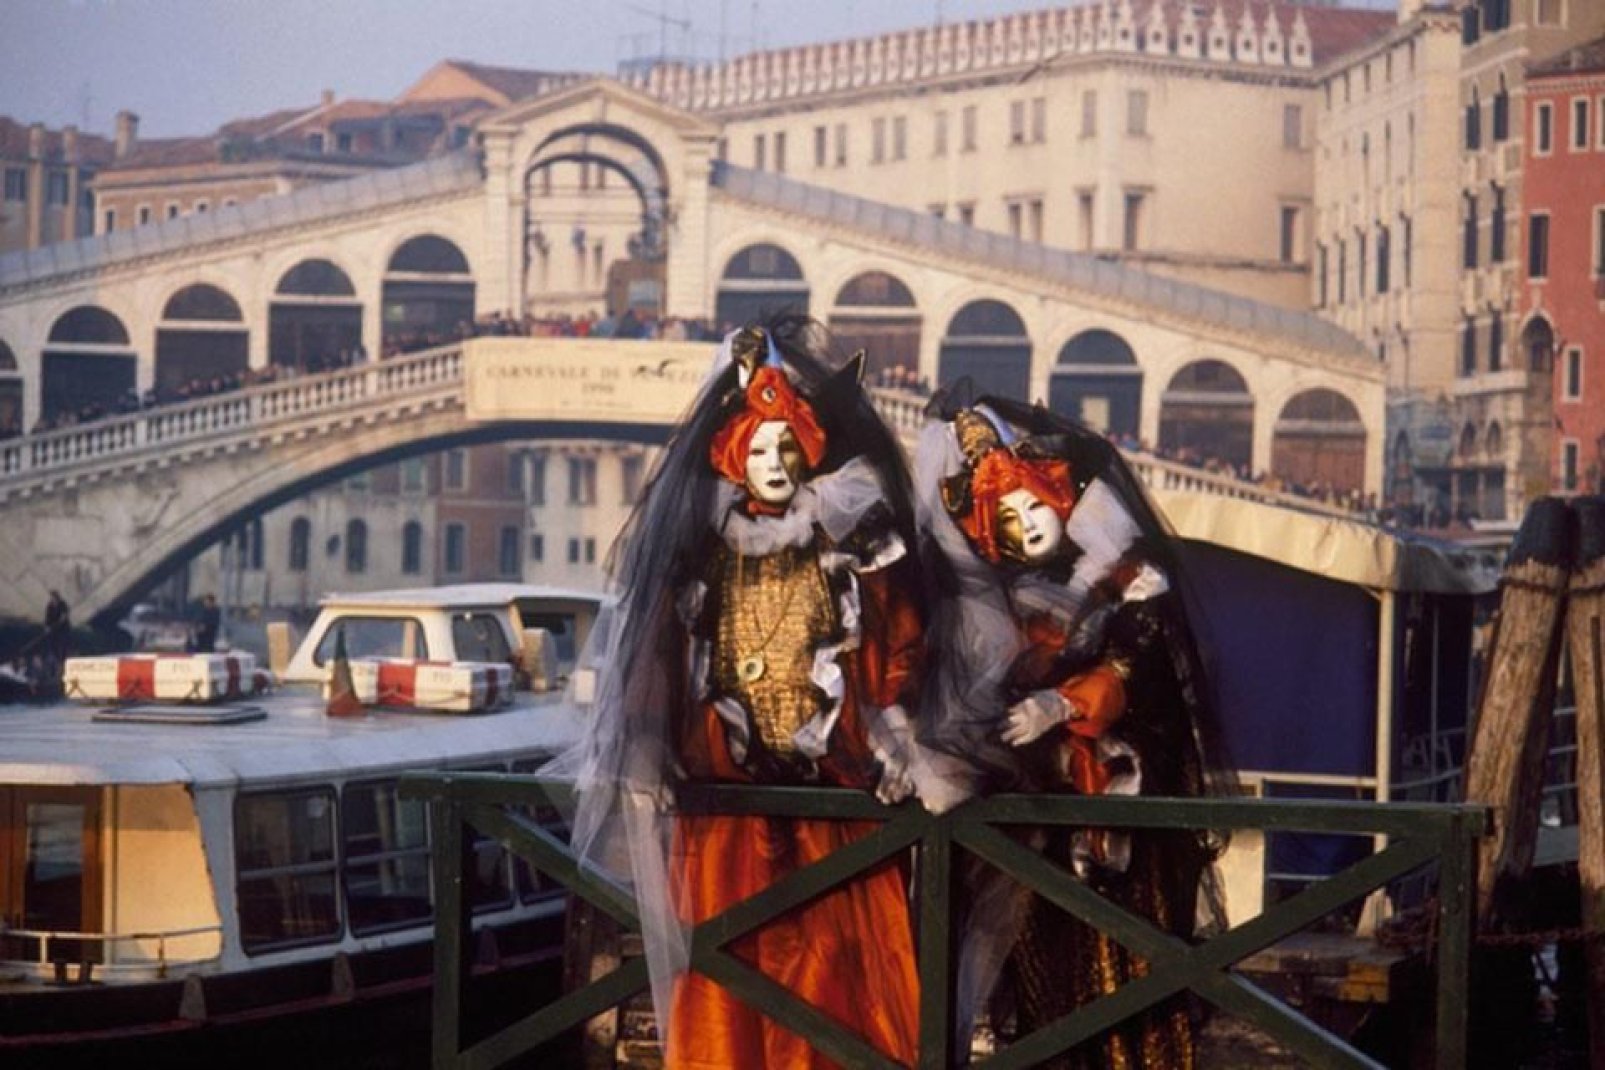 Venice's carnival is a spectacular tourist event which attracts thousands of visitors from around the world who flock to the city to join in the celebrations.